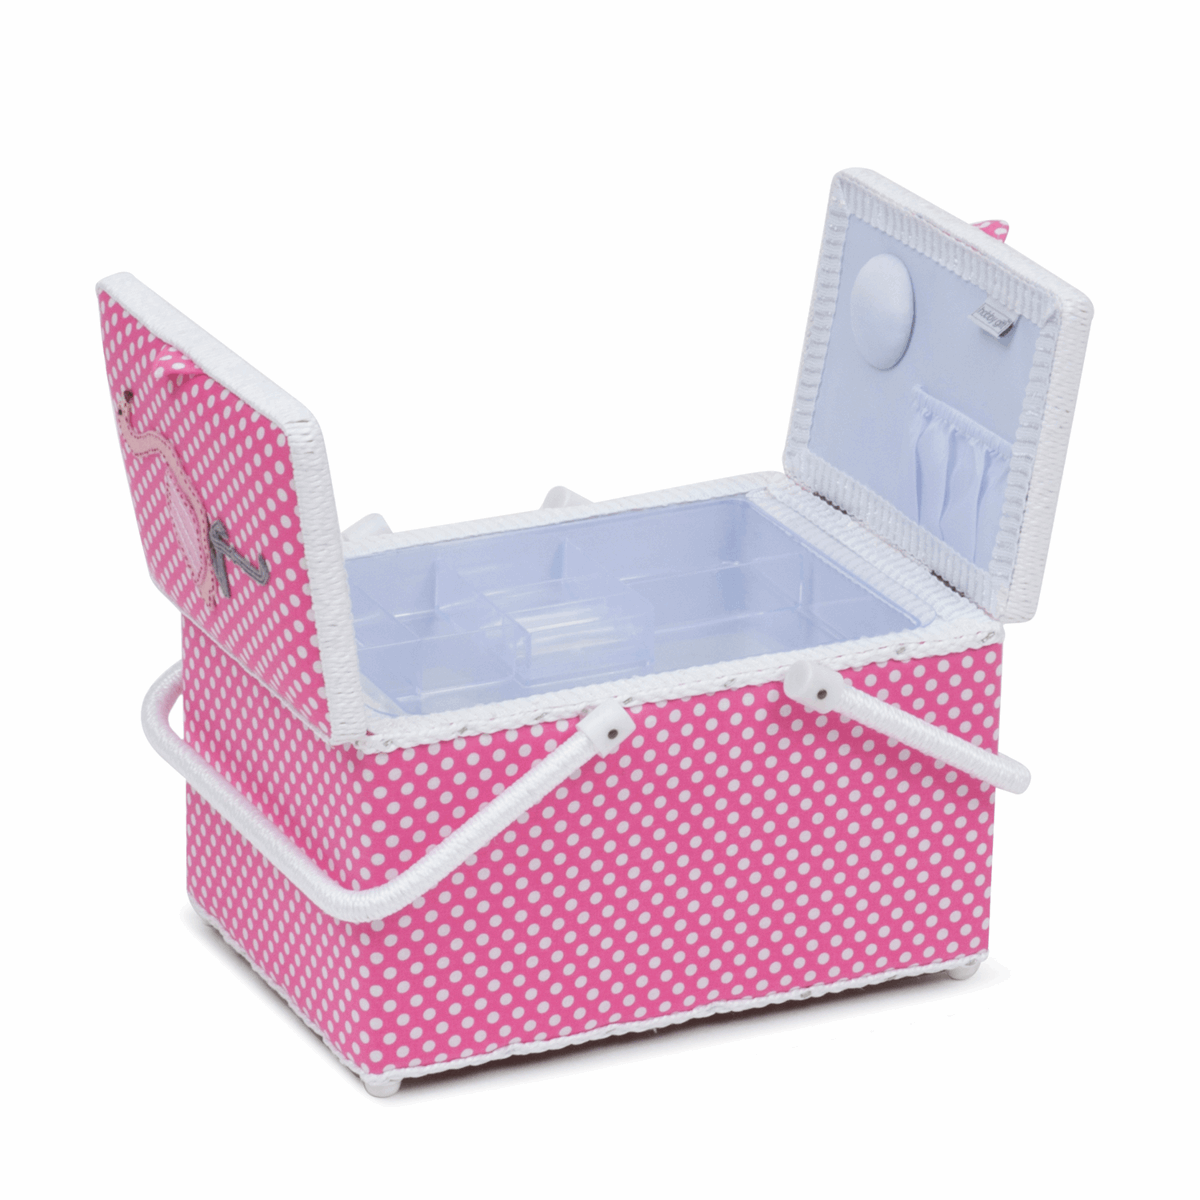 Applique Flamingo Twin Lid Sewing Box - Large